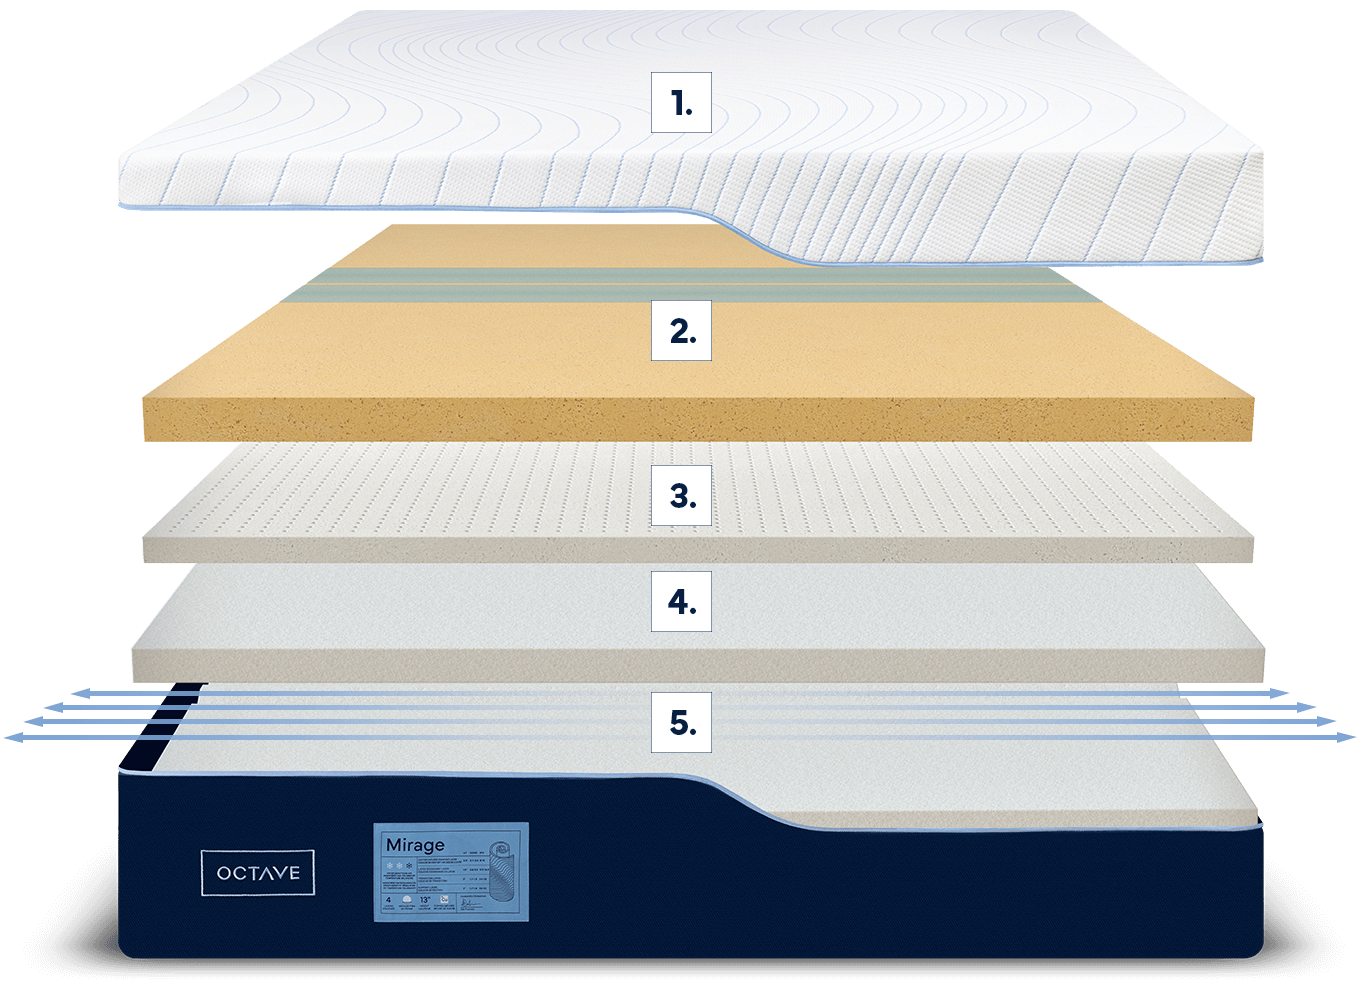 Expanded cutaway view of the 5 specialty foam layers on Octave Mirage